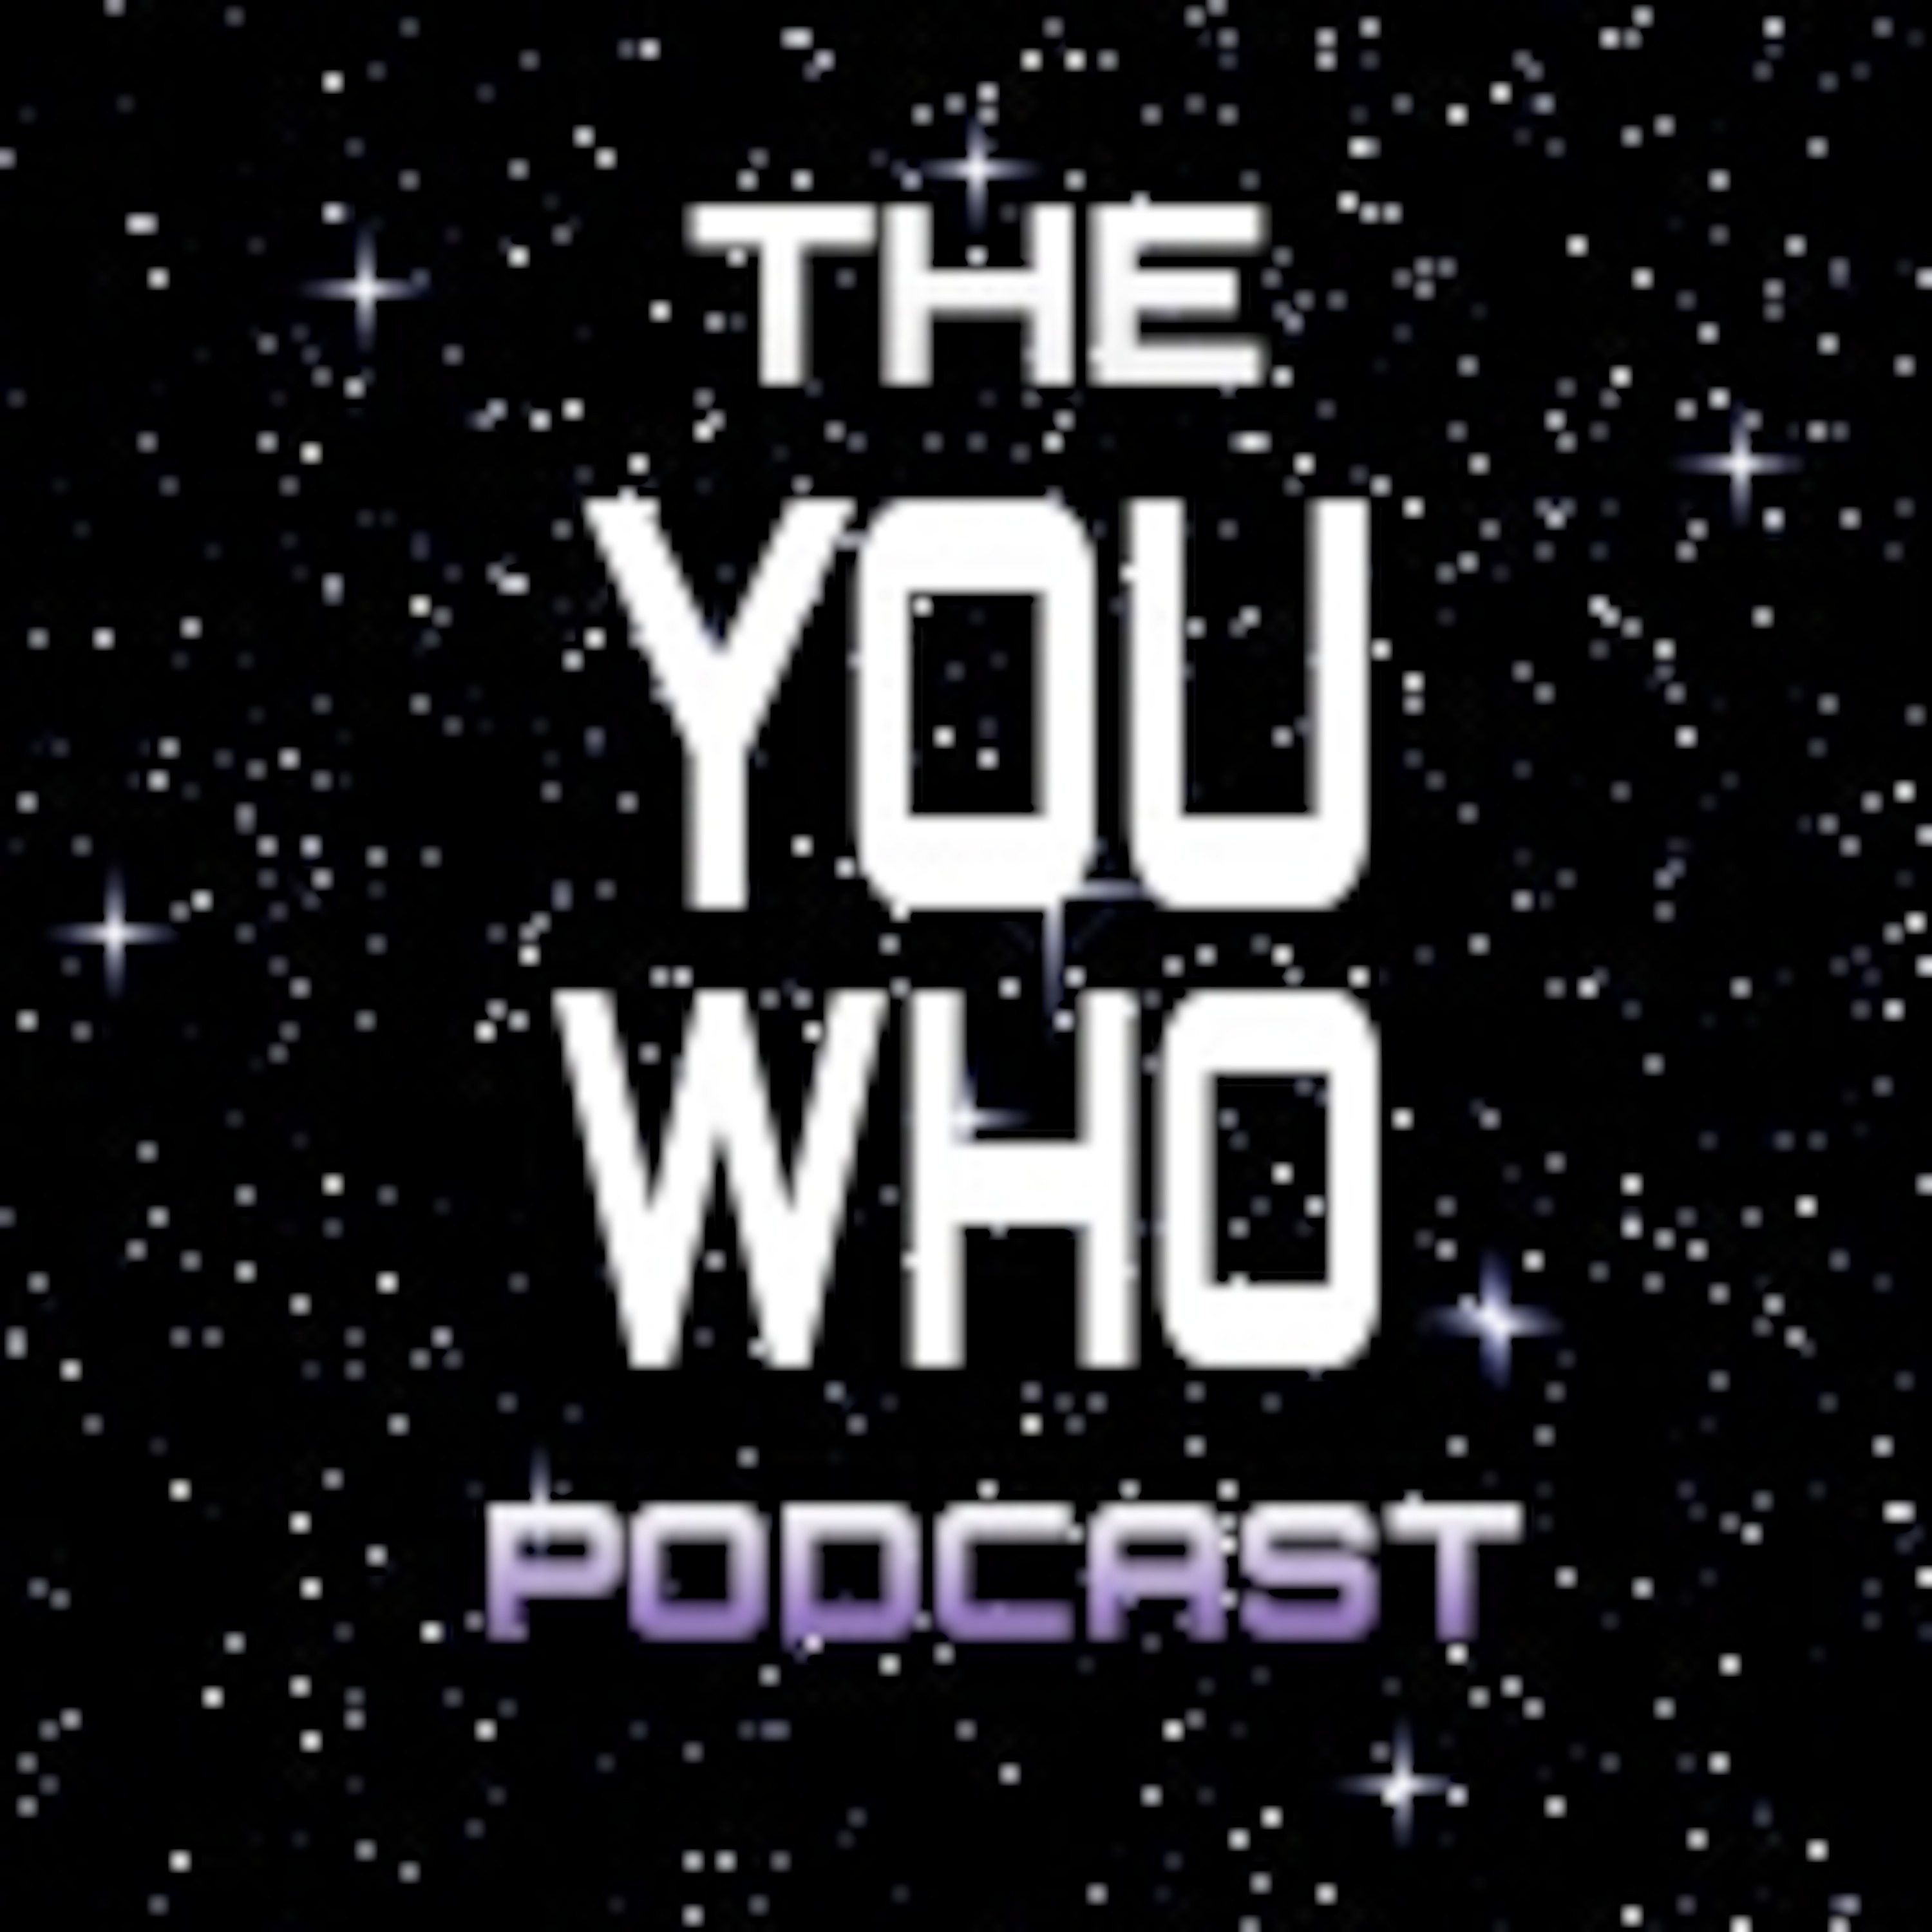 Doctor Who: The You Who Podcast